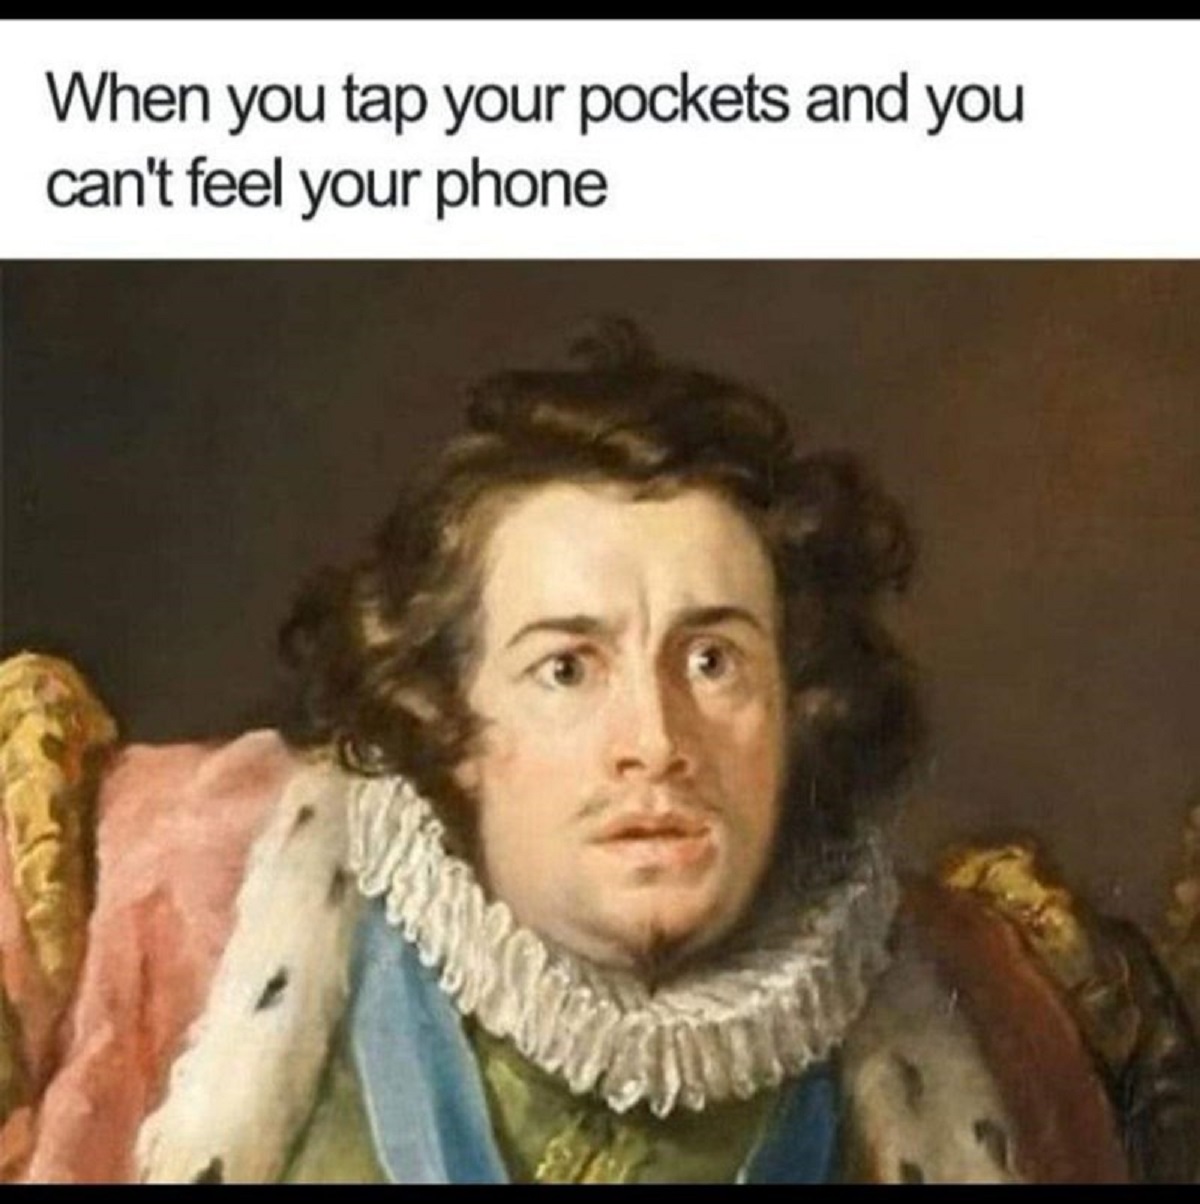 art memes funny - When you tap your pockets and you can't feel your phone